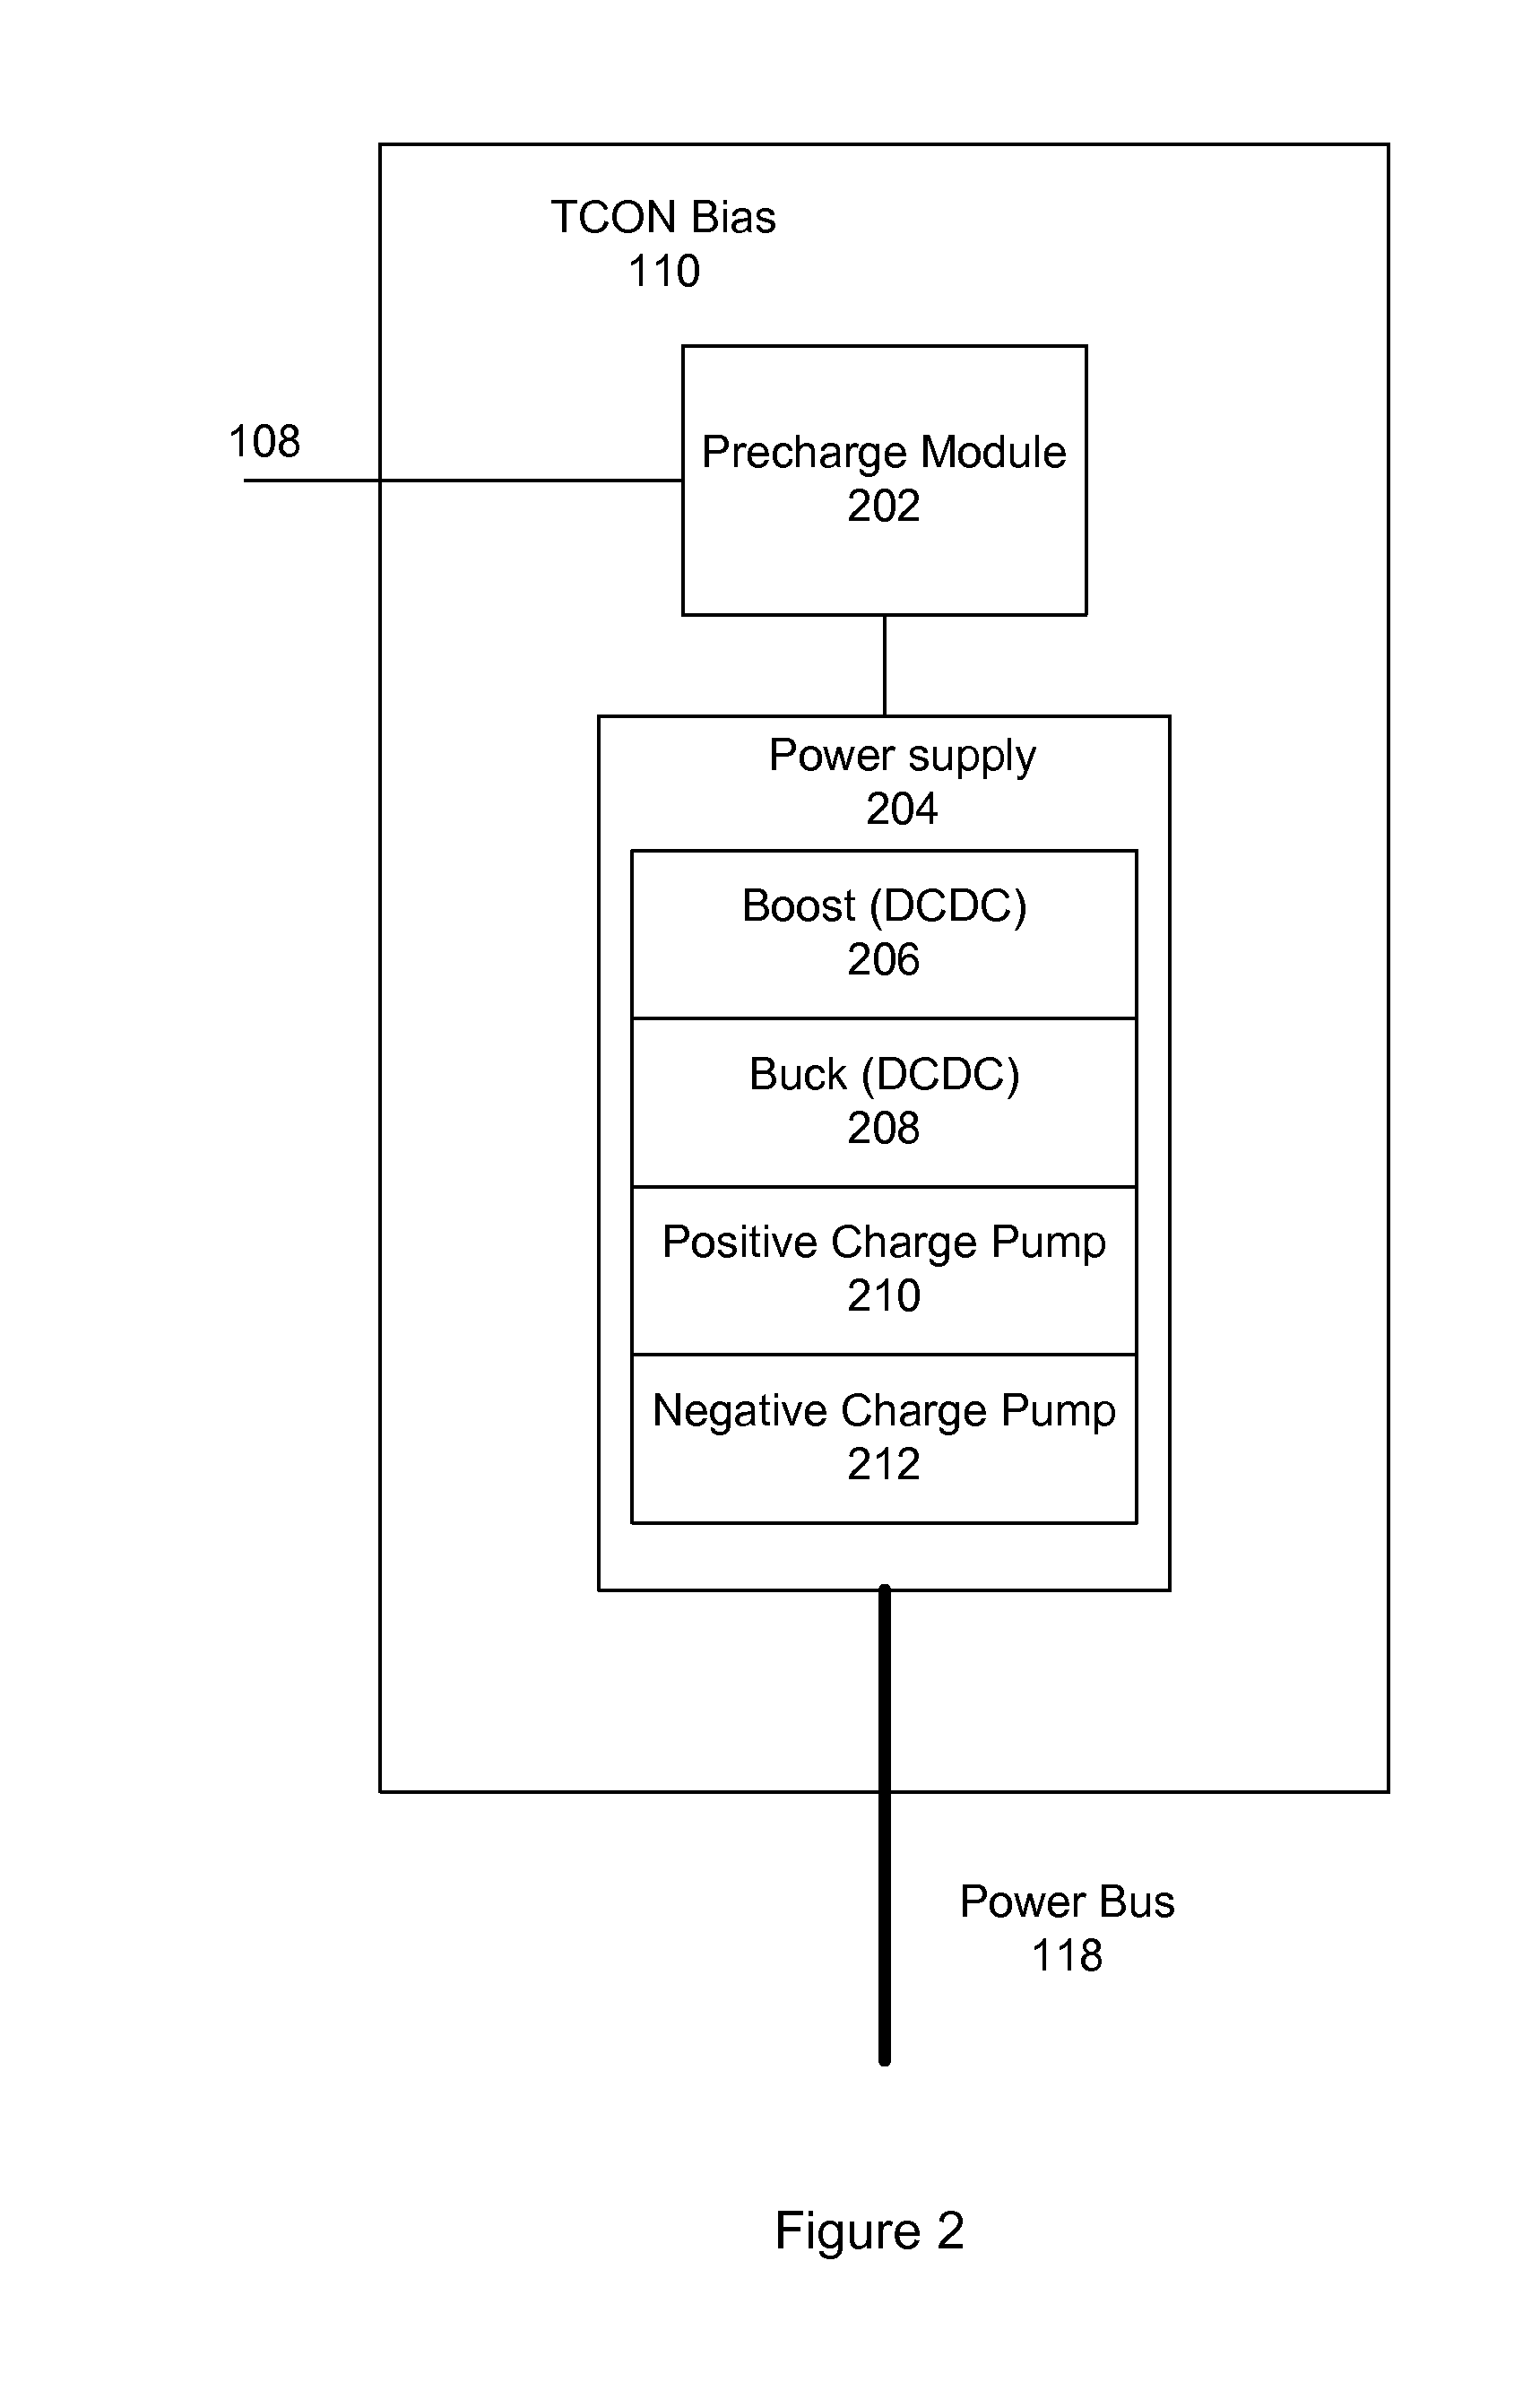 Predictive power control in a flat panel display